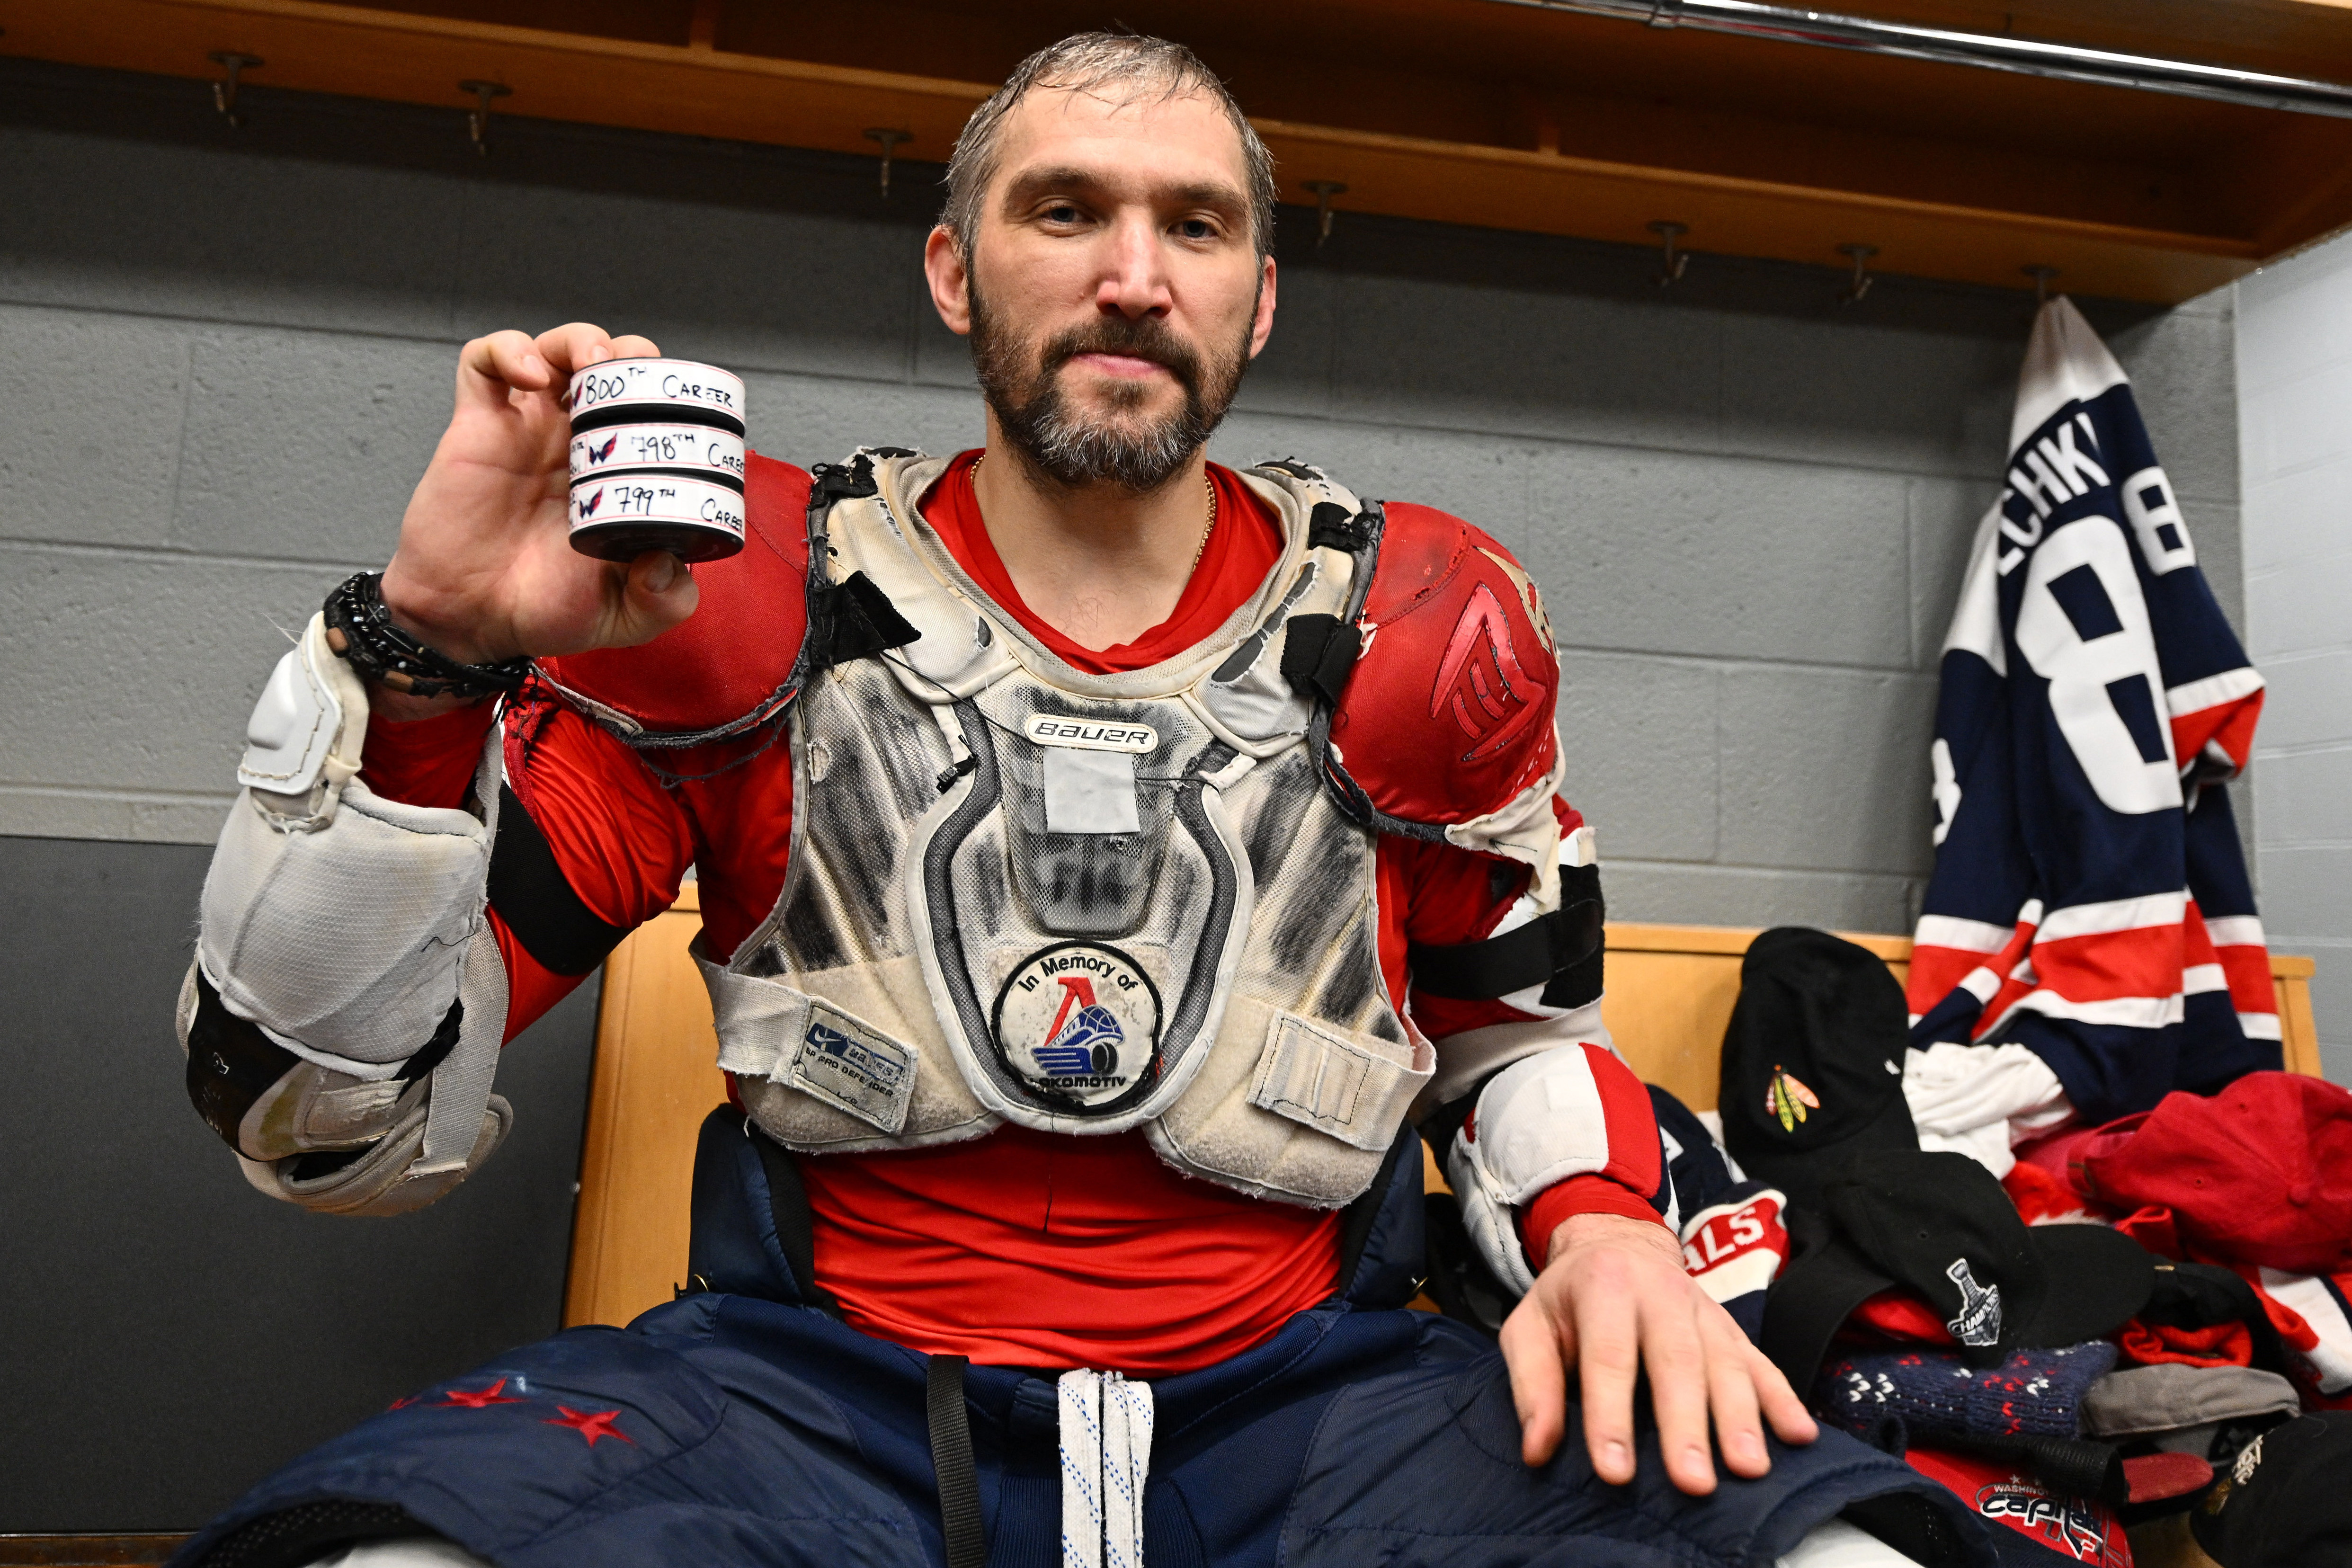 Ovechkin hat trick adds up to 800 career goals